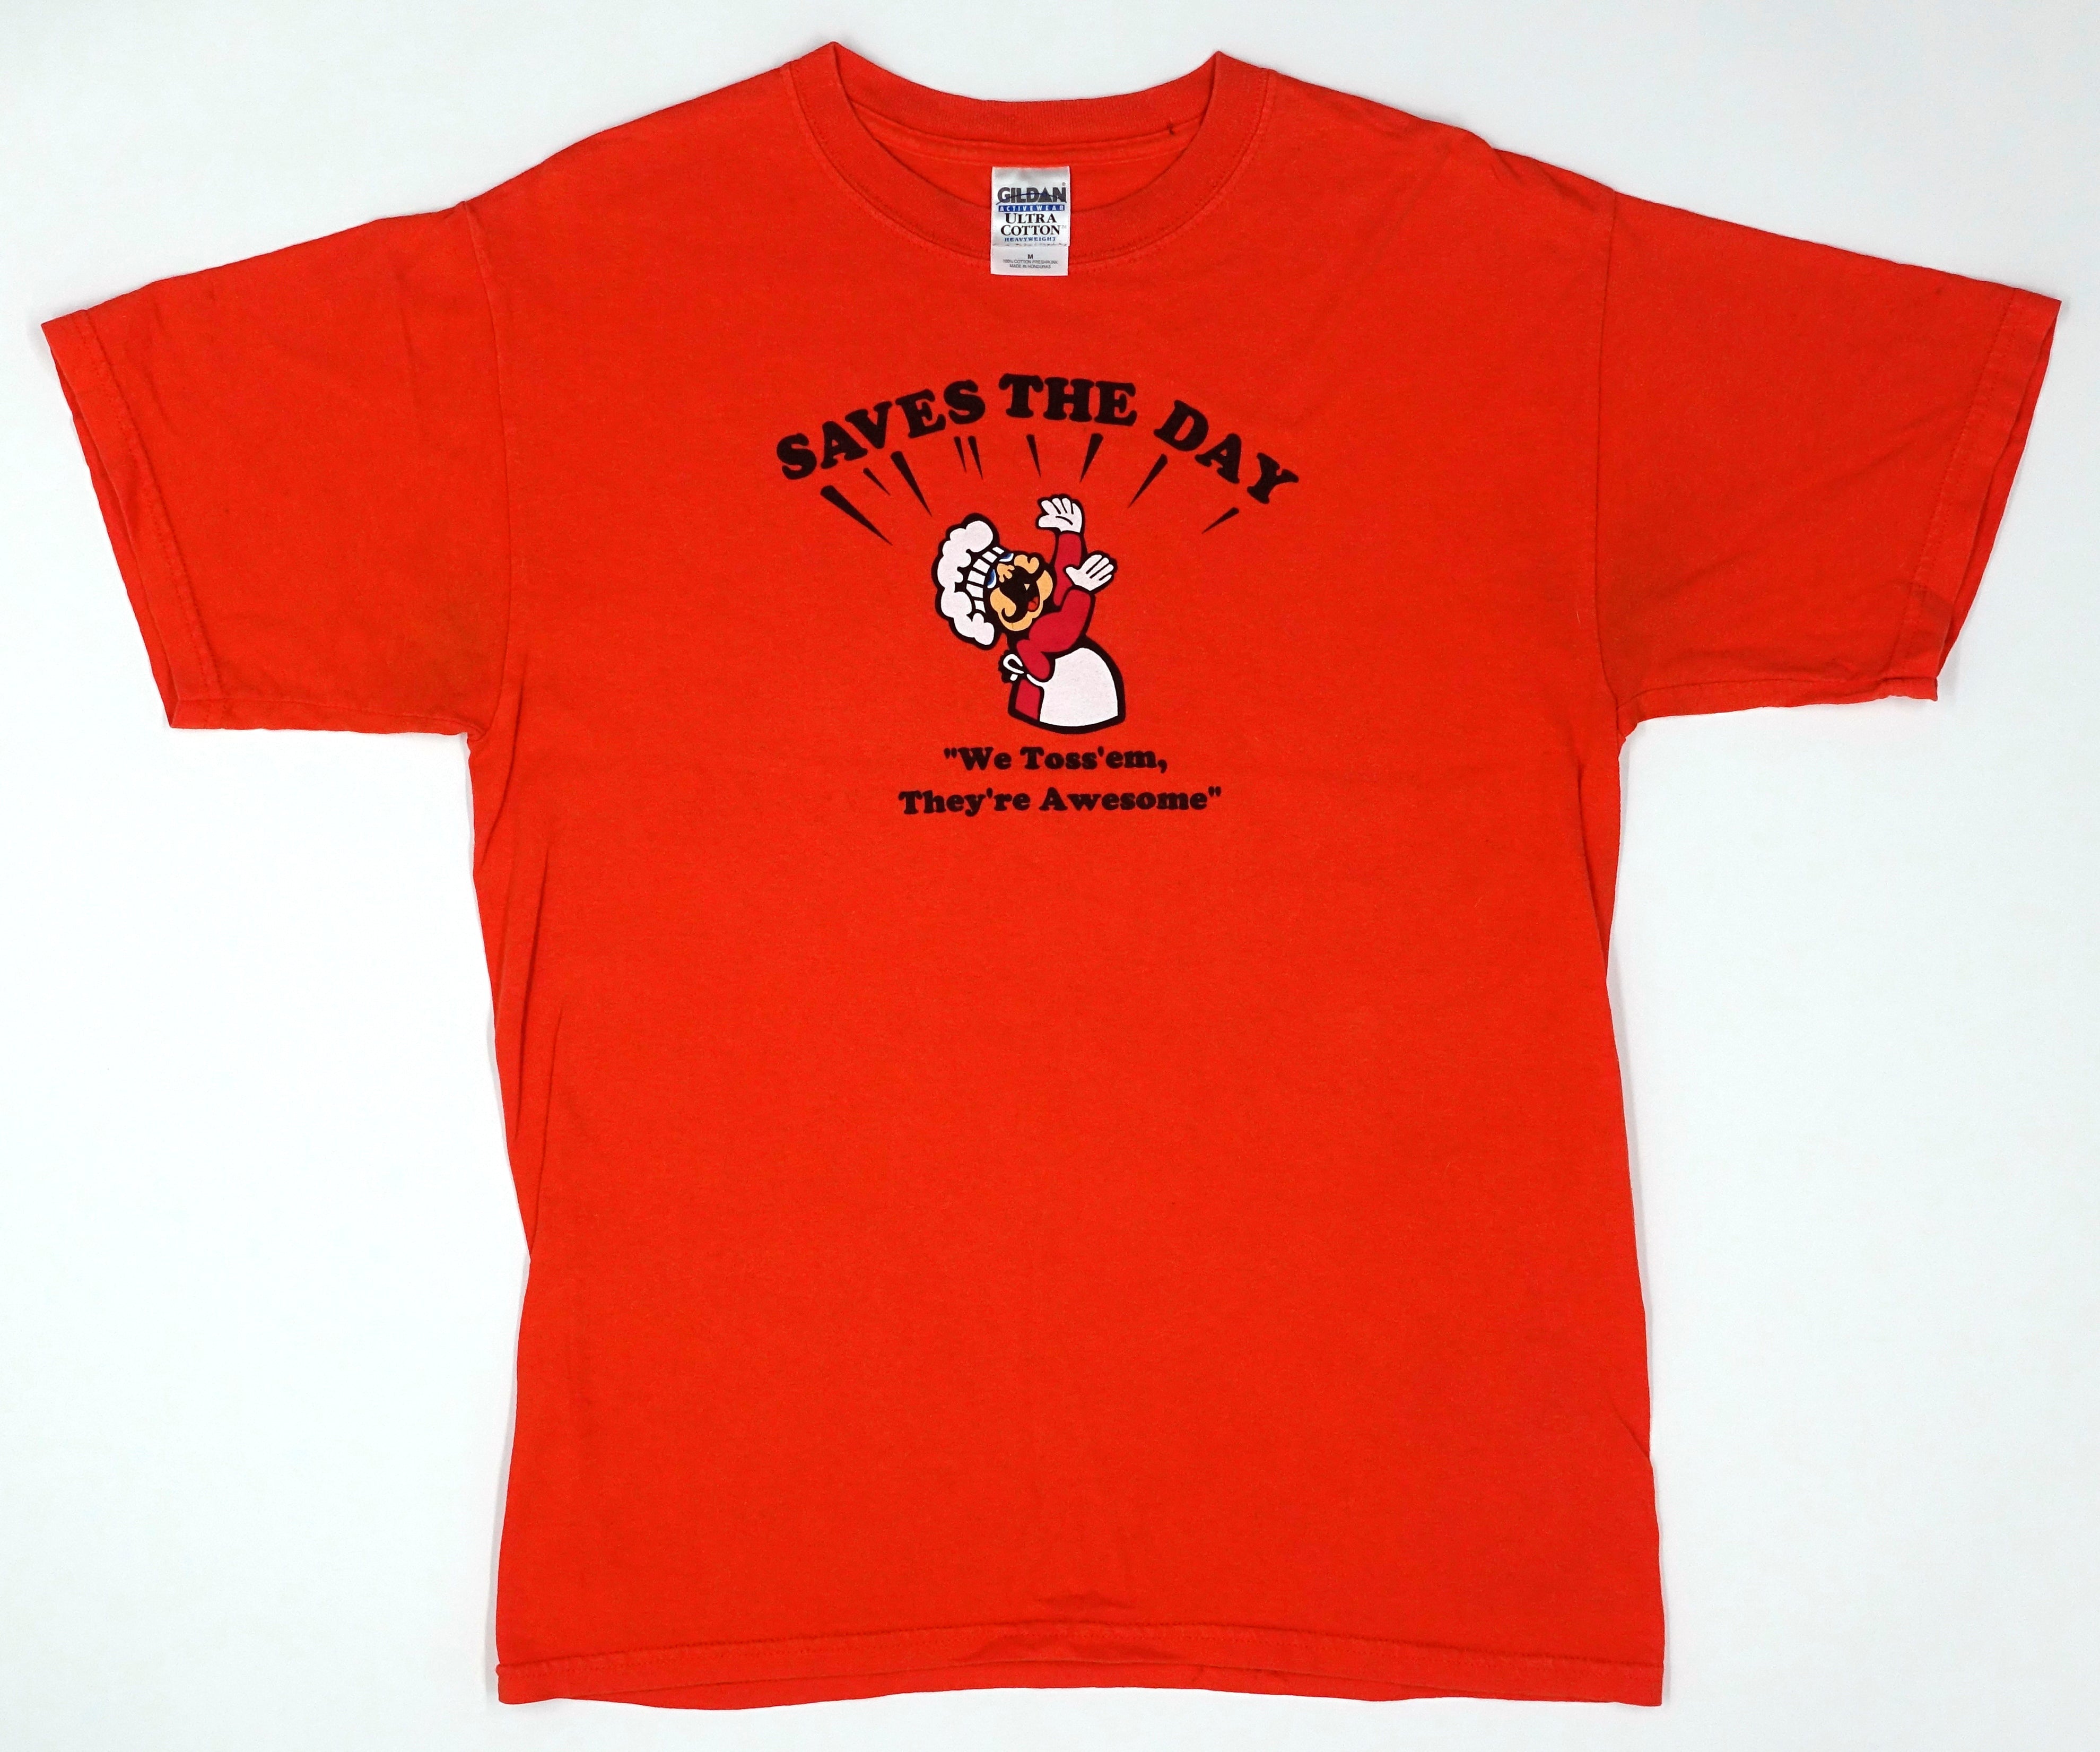 Saves The Day - We Toss' Em, They're Awesome Tour Shirt Size Medium